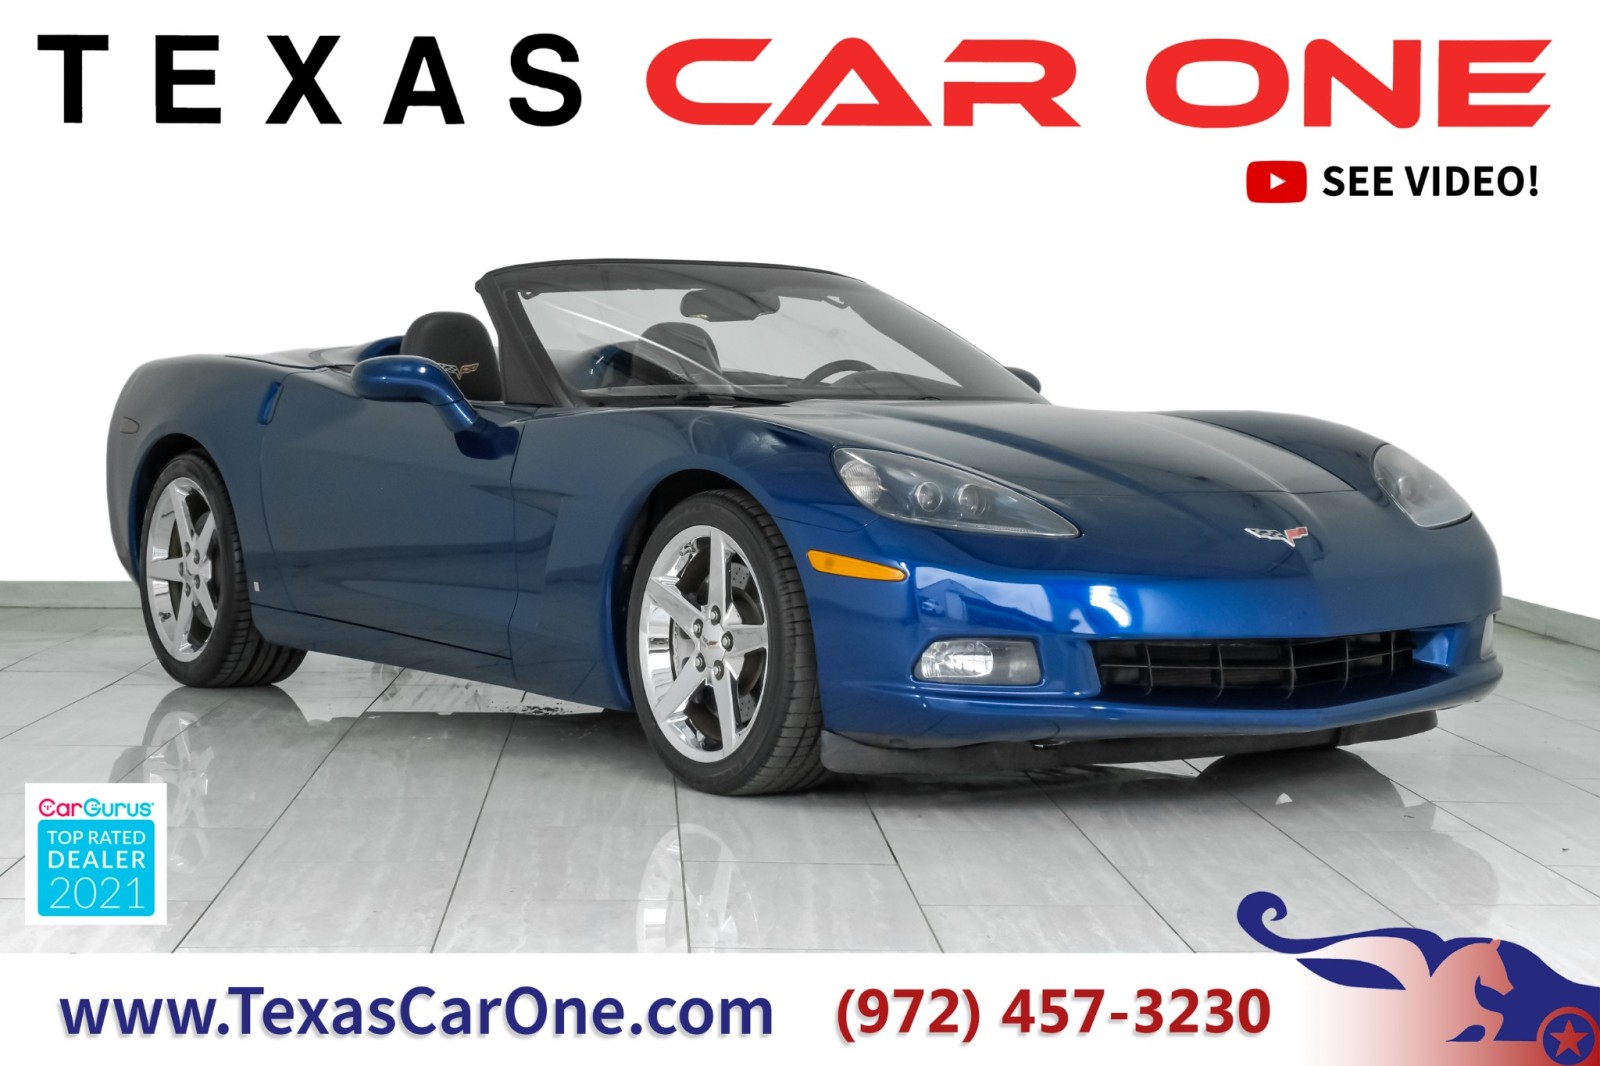 2007 Chevrolet Corvette Convertible AUTOMATIC NAVIGATION HEADUP DISPLAY LEATHER HEATED 1